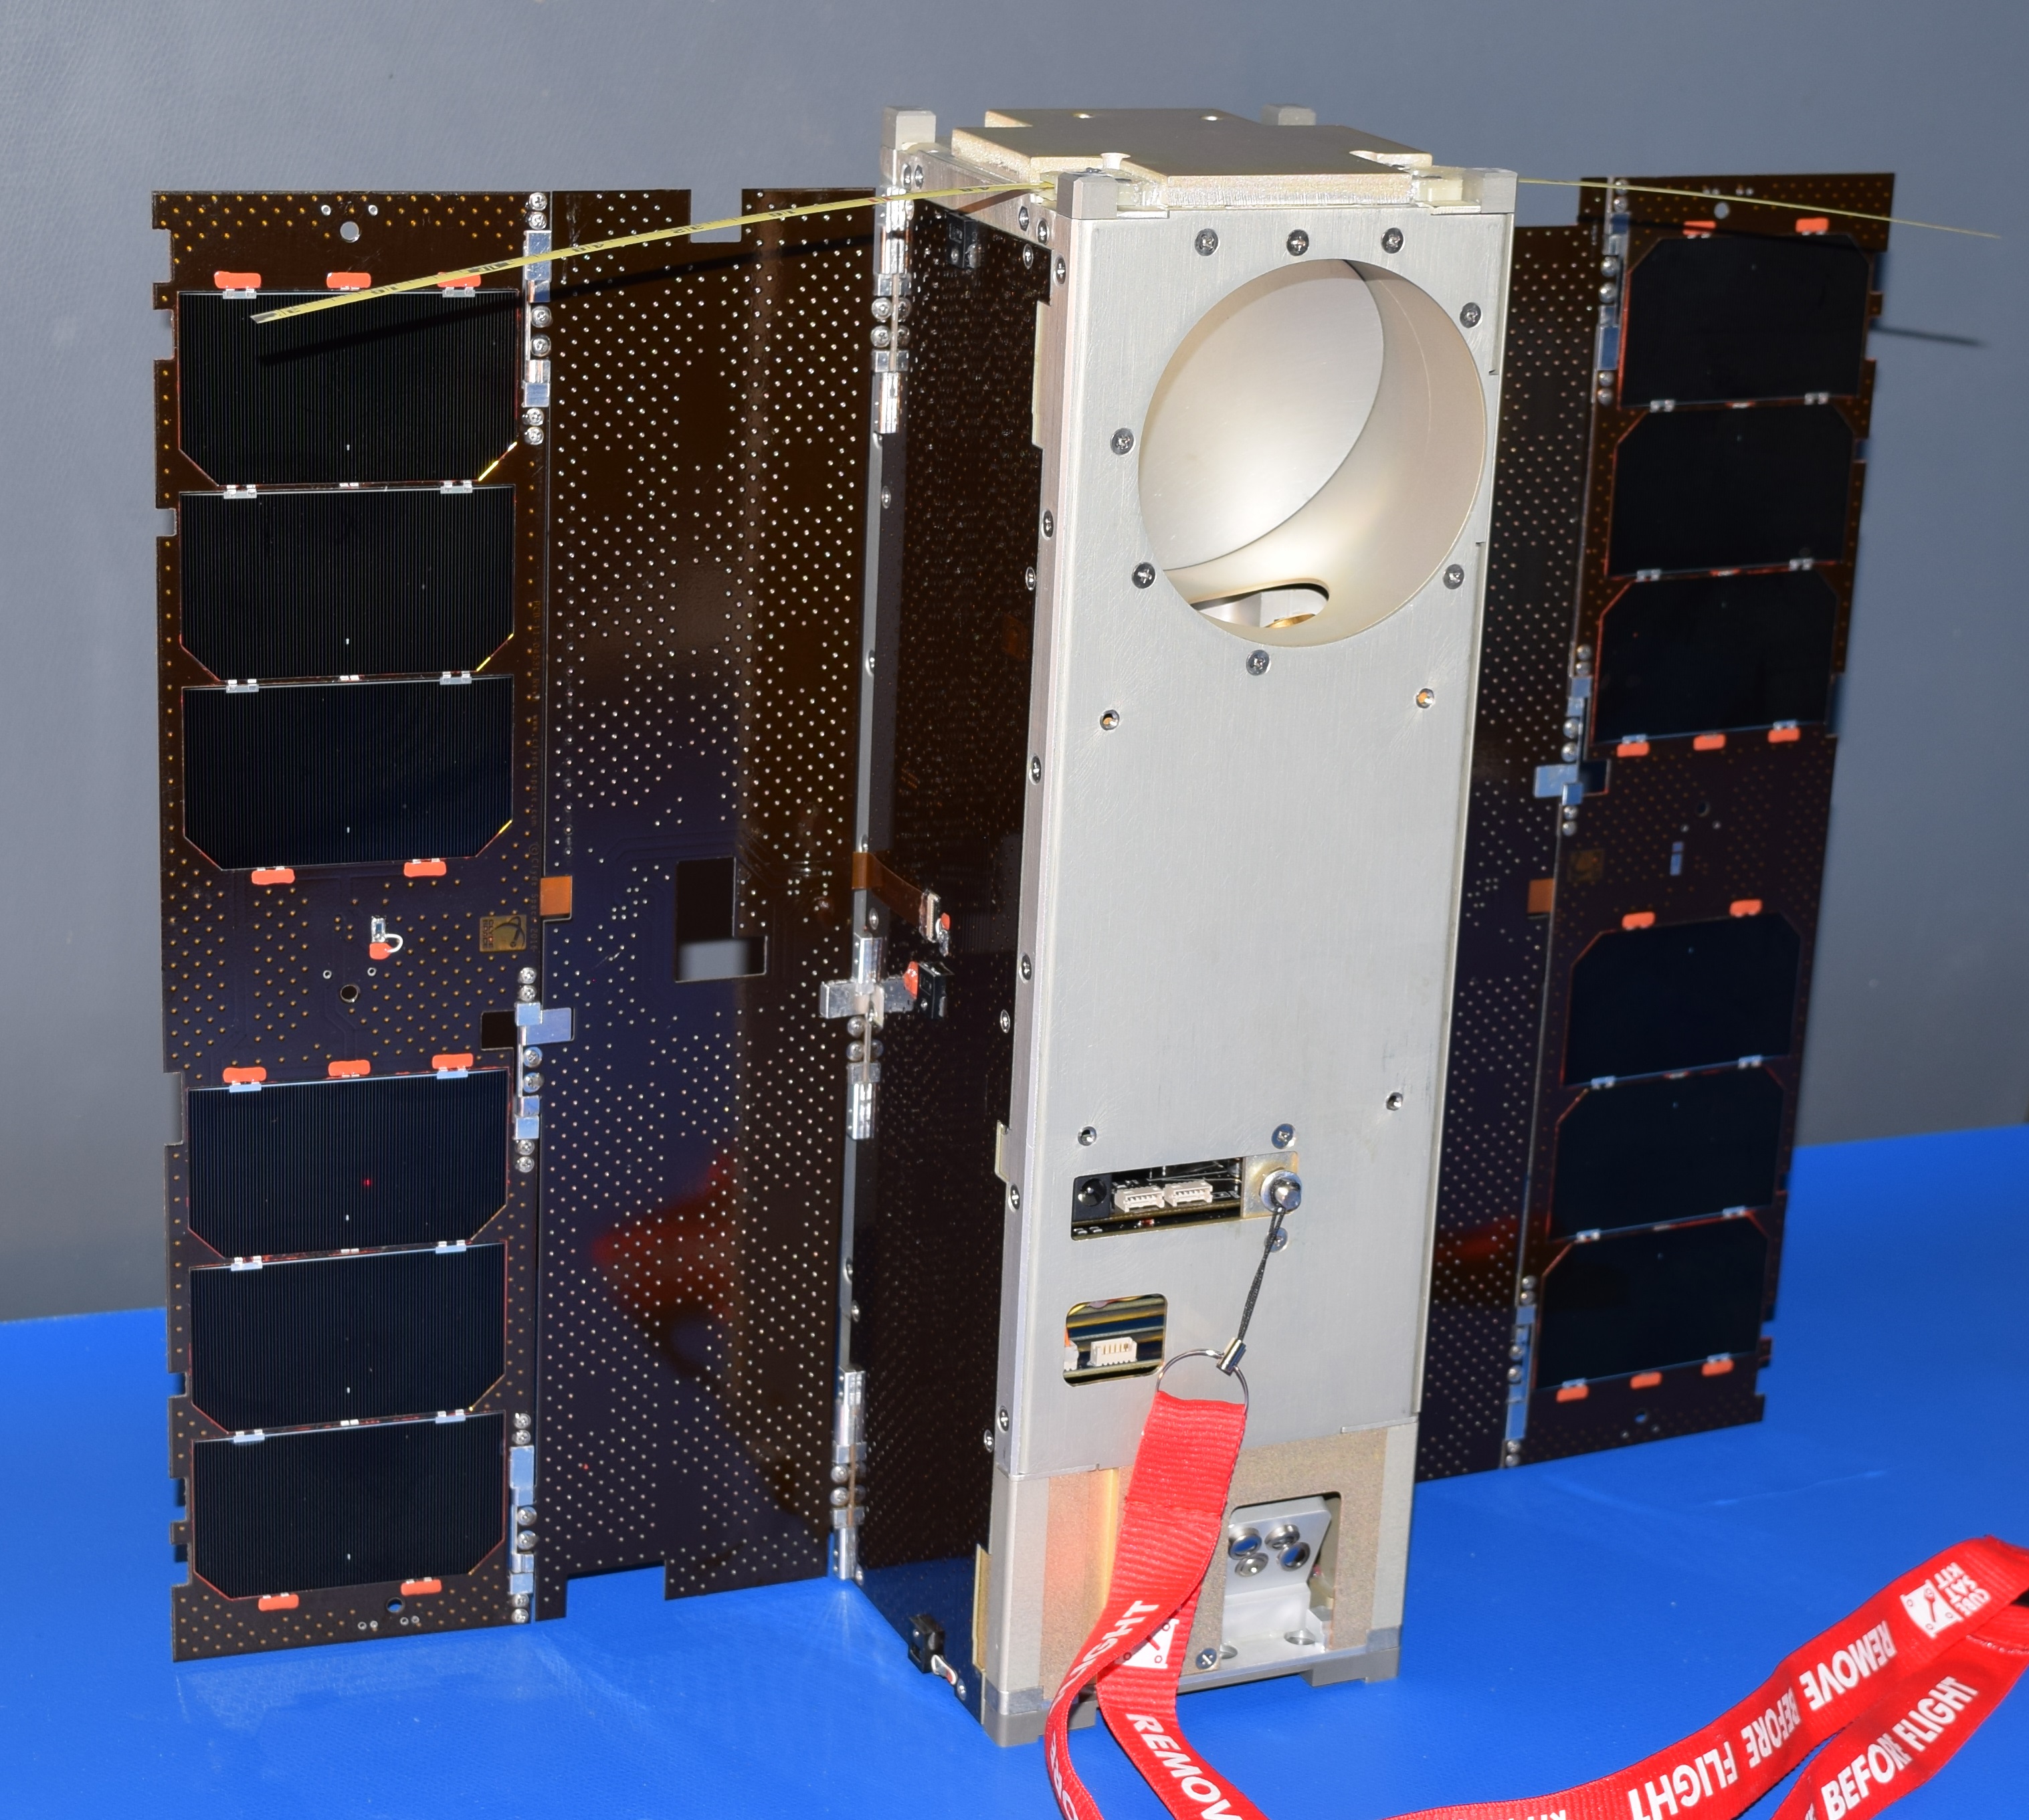 A small satellite, roughly the size and shape of a shoe box, sits on a blue tabletop. To either side of the metal box that forms its base, two long rectangular solar panels are deployed.